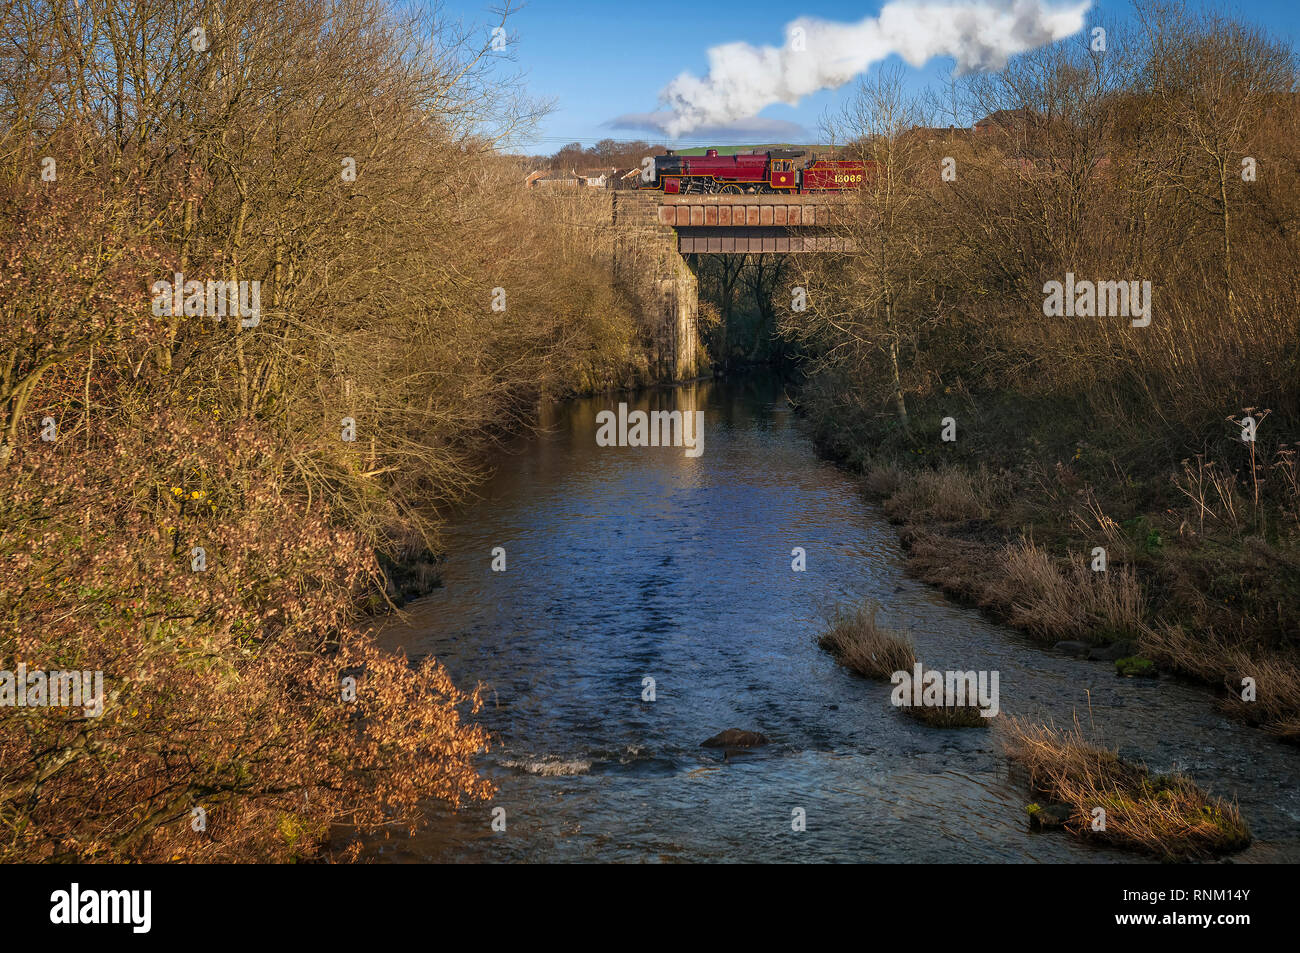 The ' Crab ' Mogul locomotive passing over the River Irwell at Burrs Country Park on the East Lancashire heritage railway at Bury in Lancashire. Stock Photo